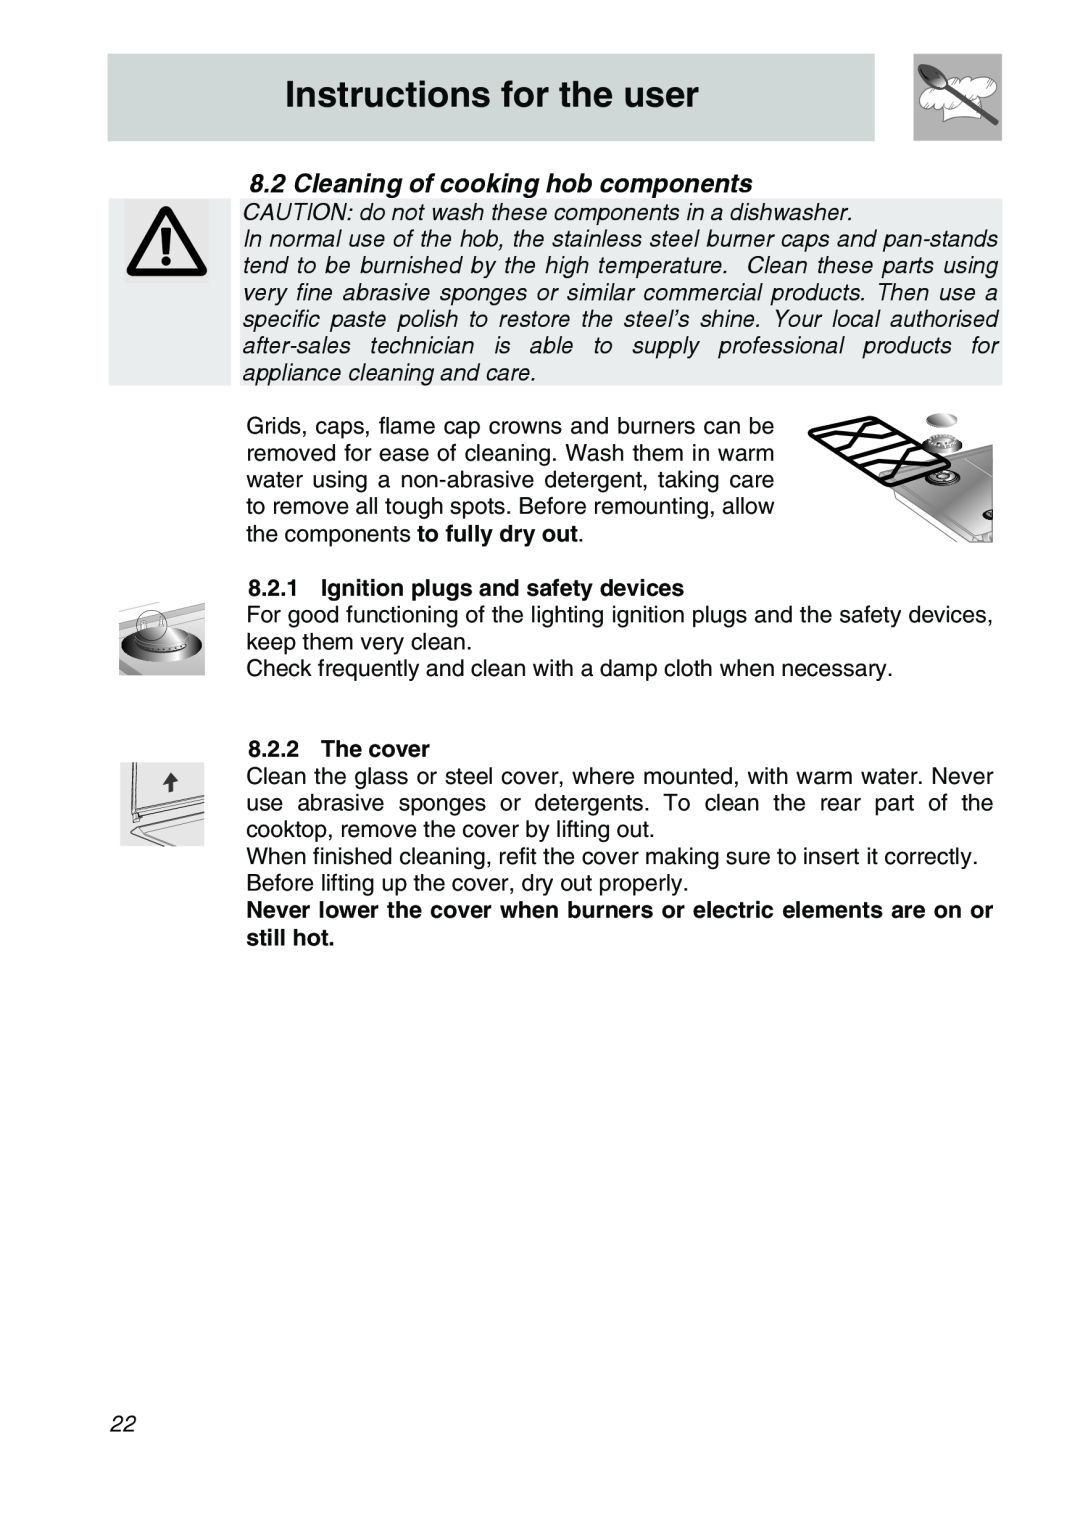 Smeg CIR60X3 Cleaning of cooking hob components, Ignition plugs and safety devices, The cover, Instructions for the user 